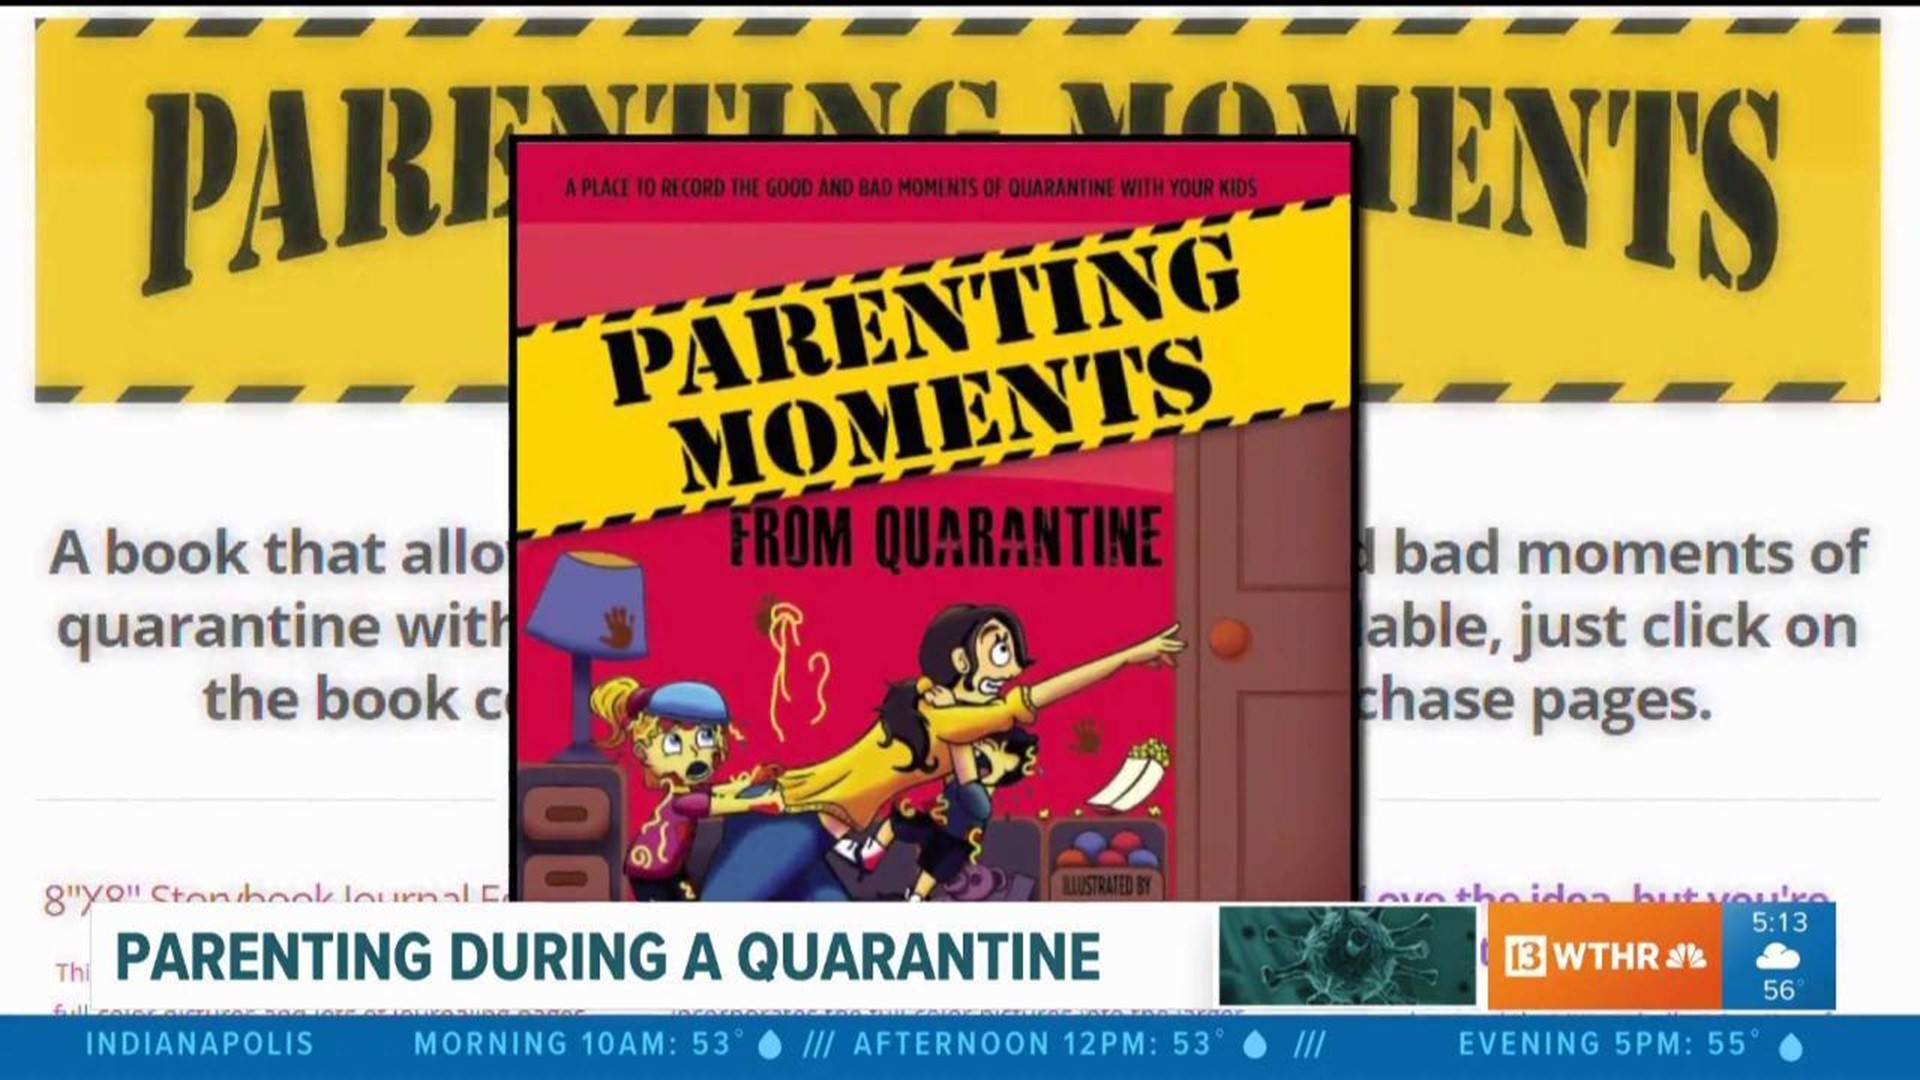 Parentings Moments from Quarantine book